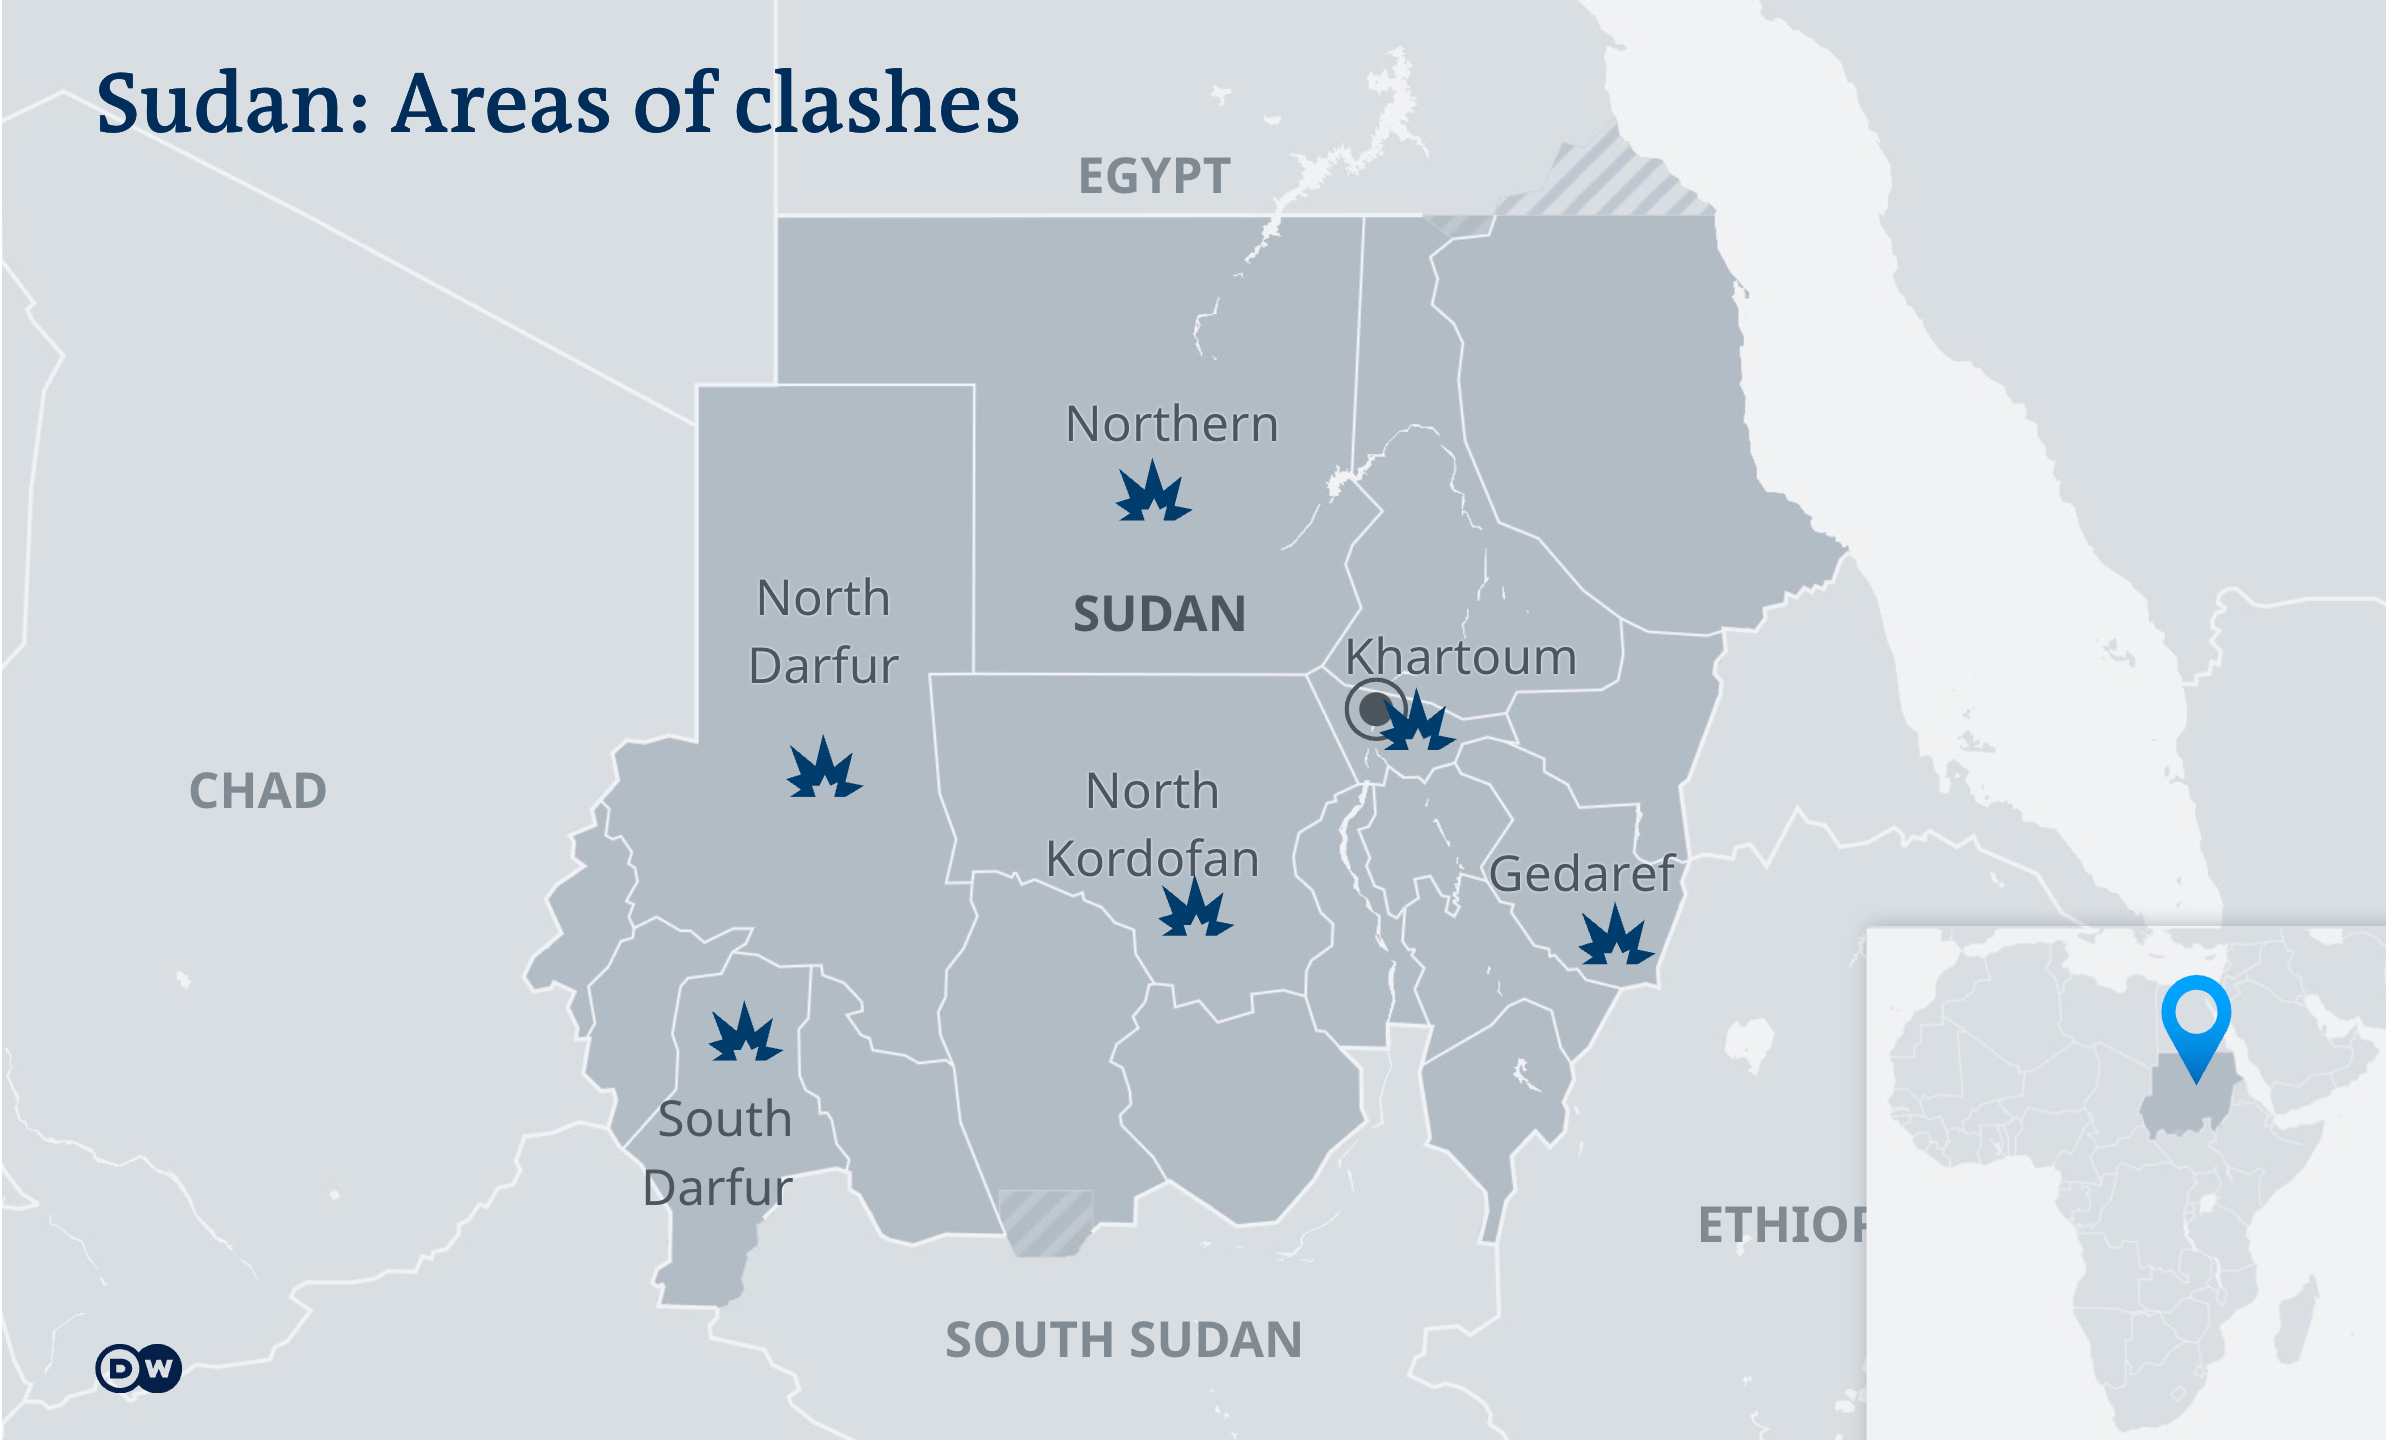 Areas of Sudan affected by the ongoing clashes between the RSF and the Sudanese military (source: DW)